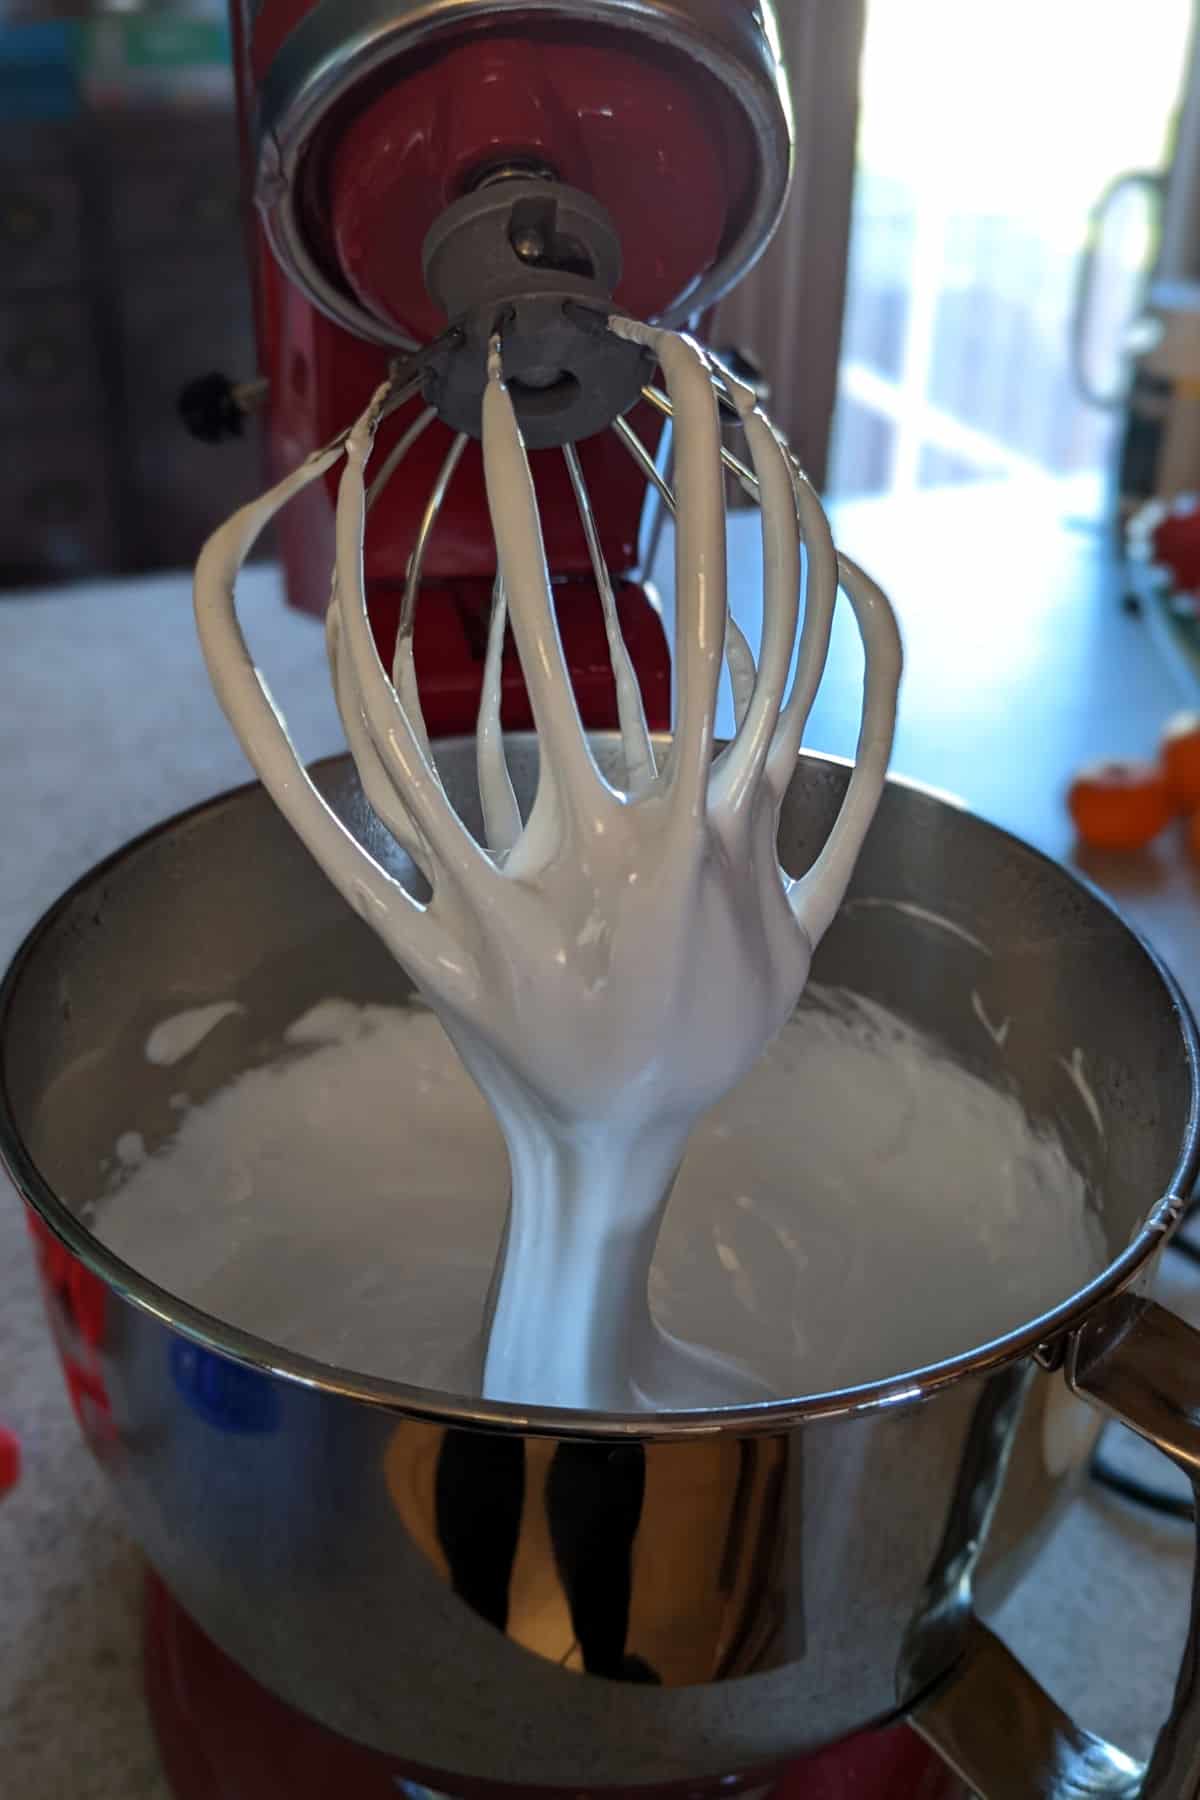 marshmallow fluff pouring from whisk attachment of stand mixer